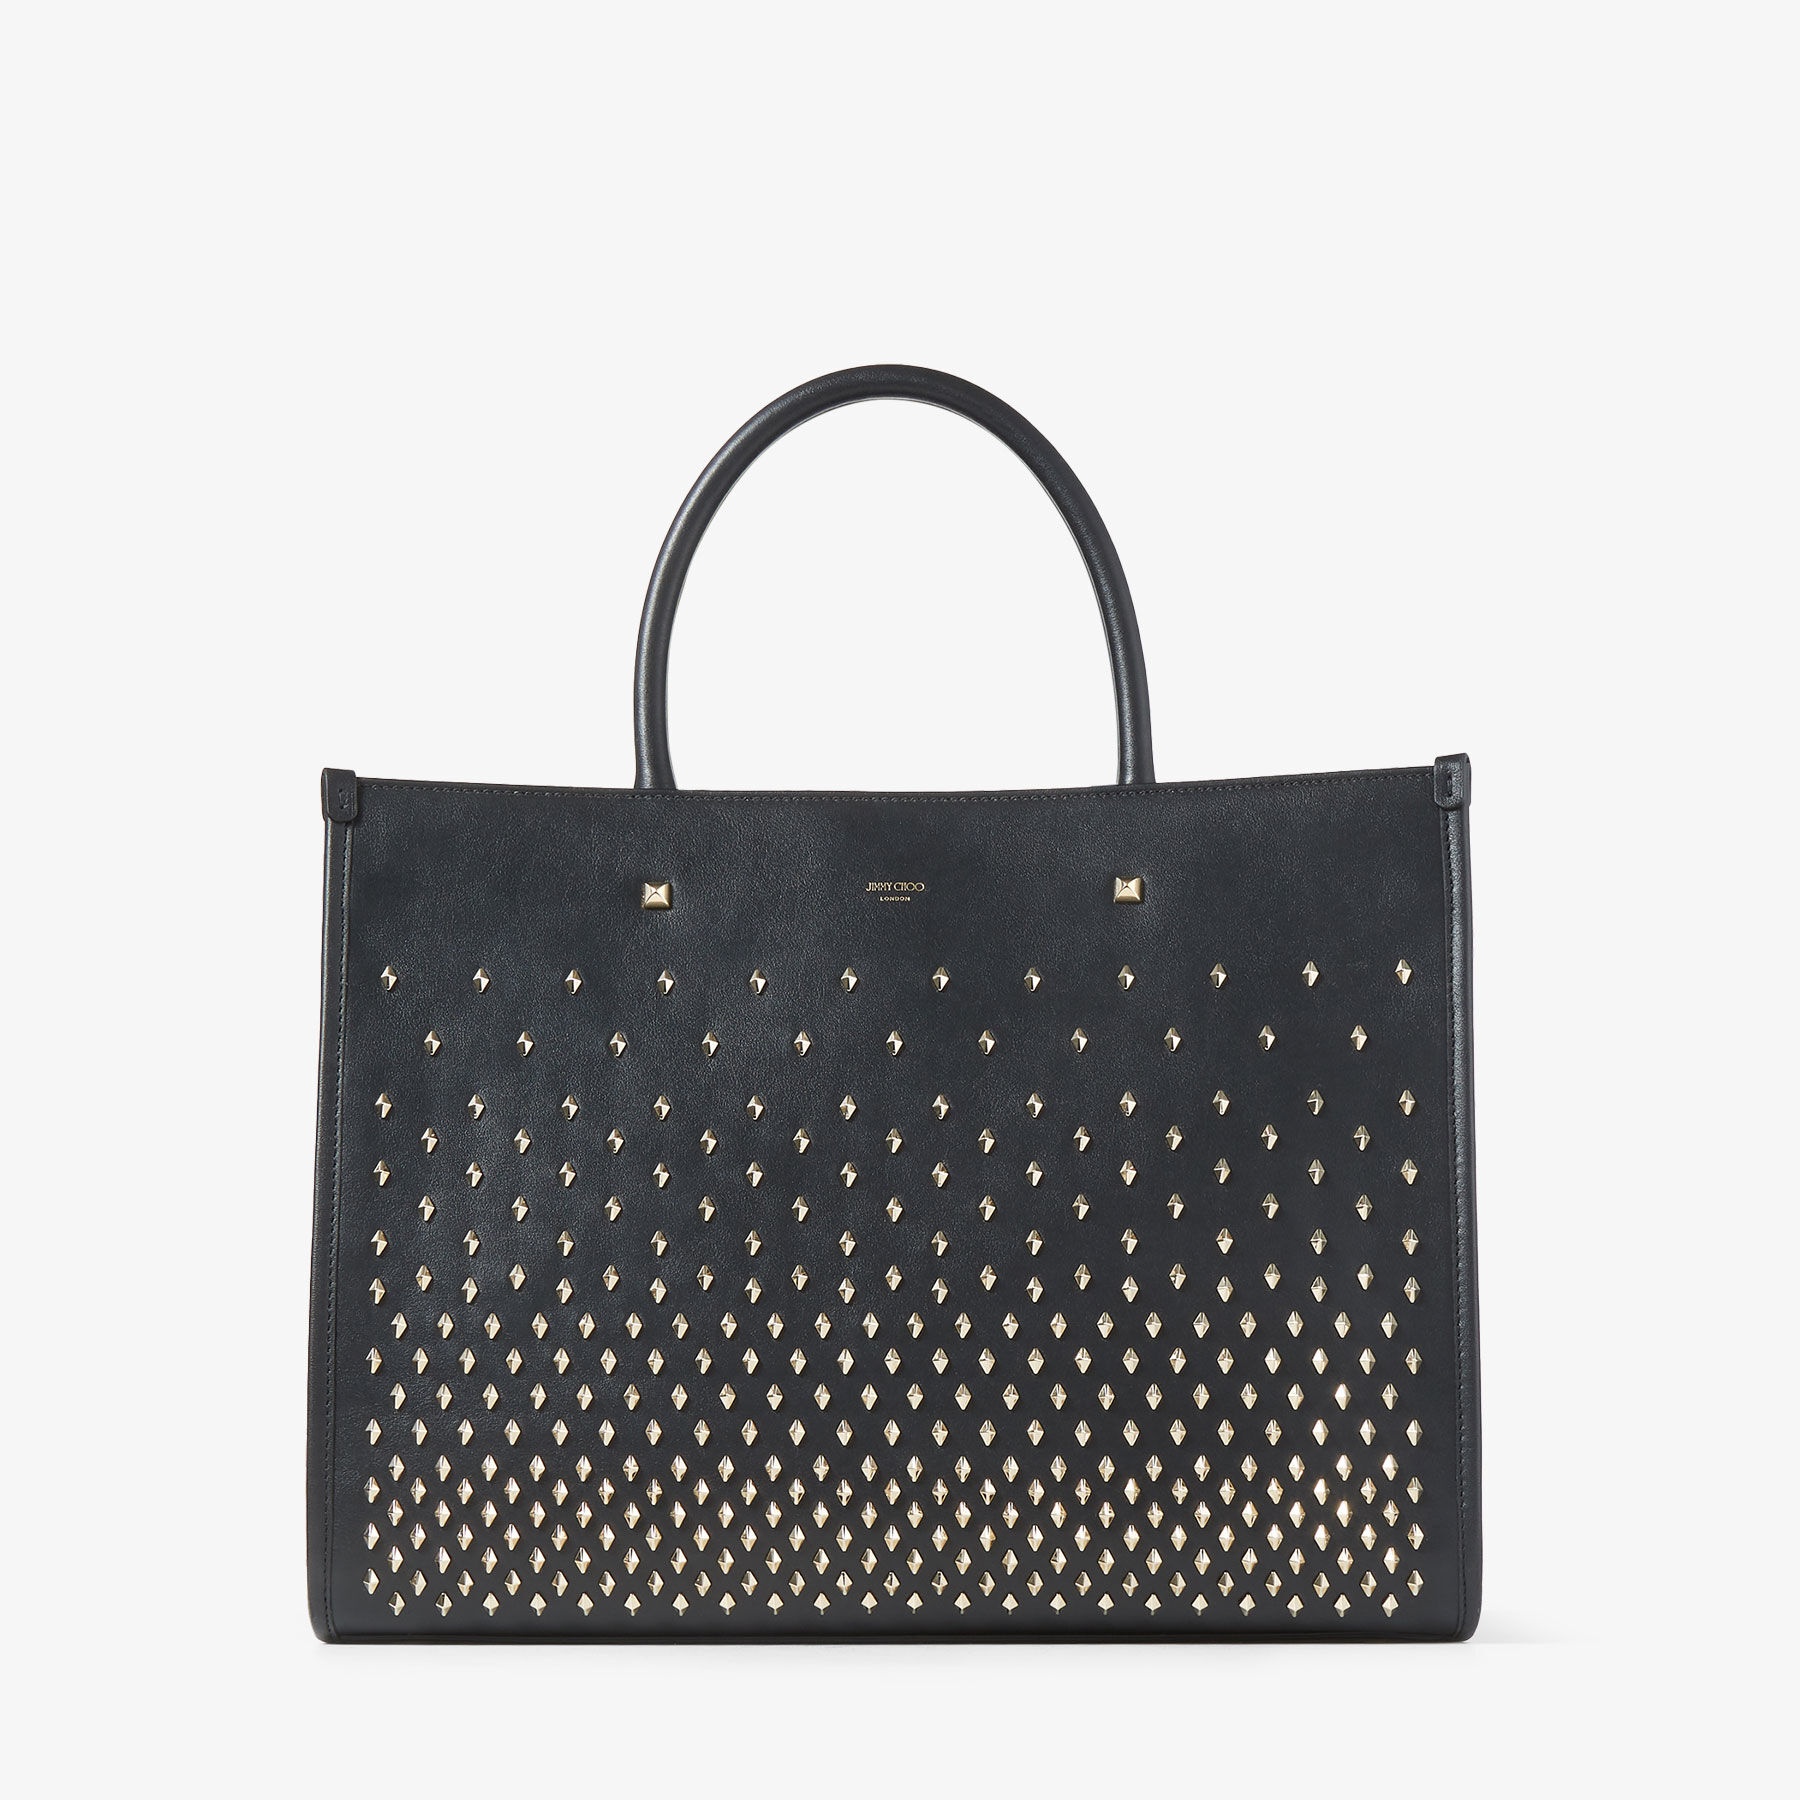 Varenne M Tote
Black Leather Tote Bag with Studs - 1